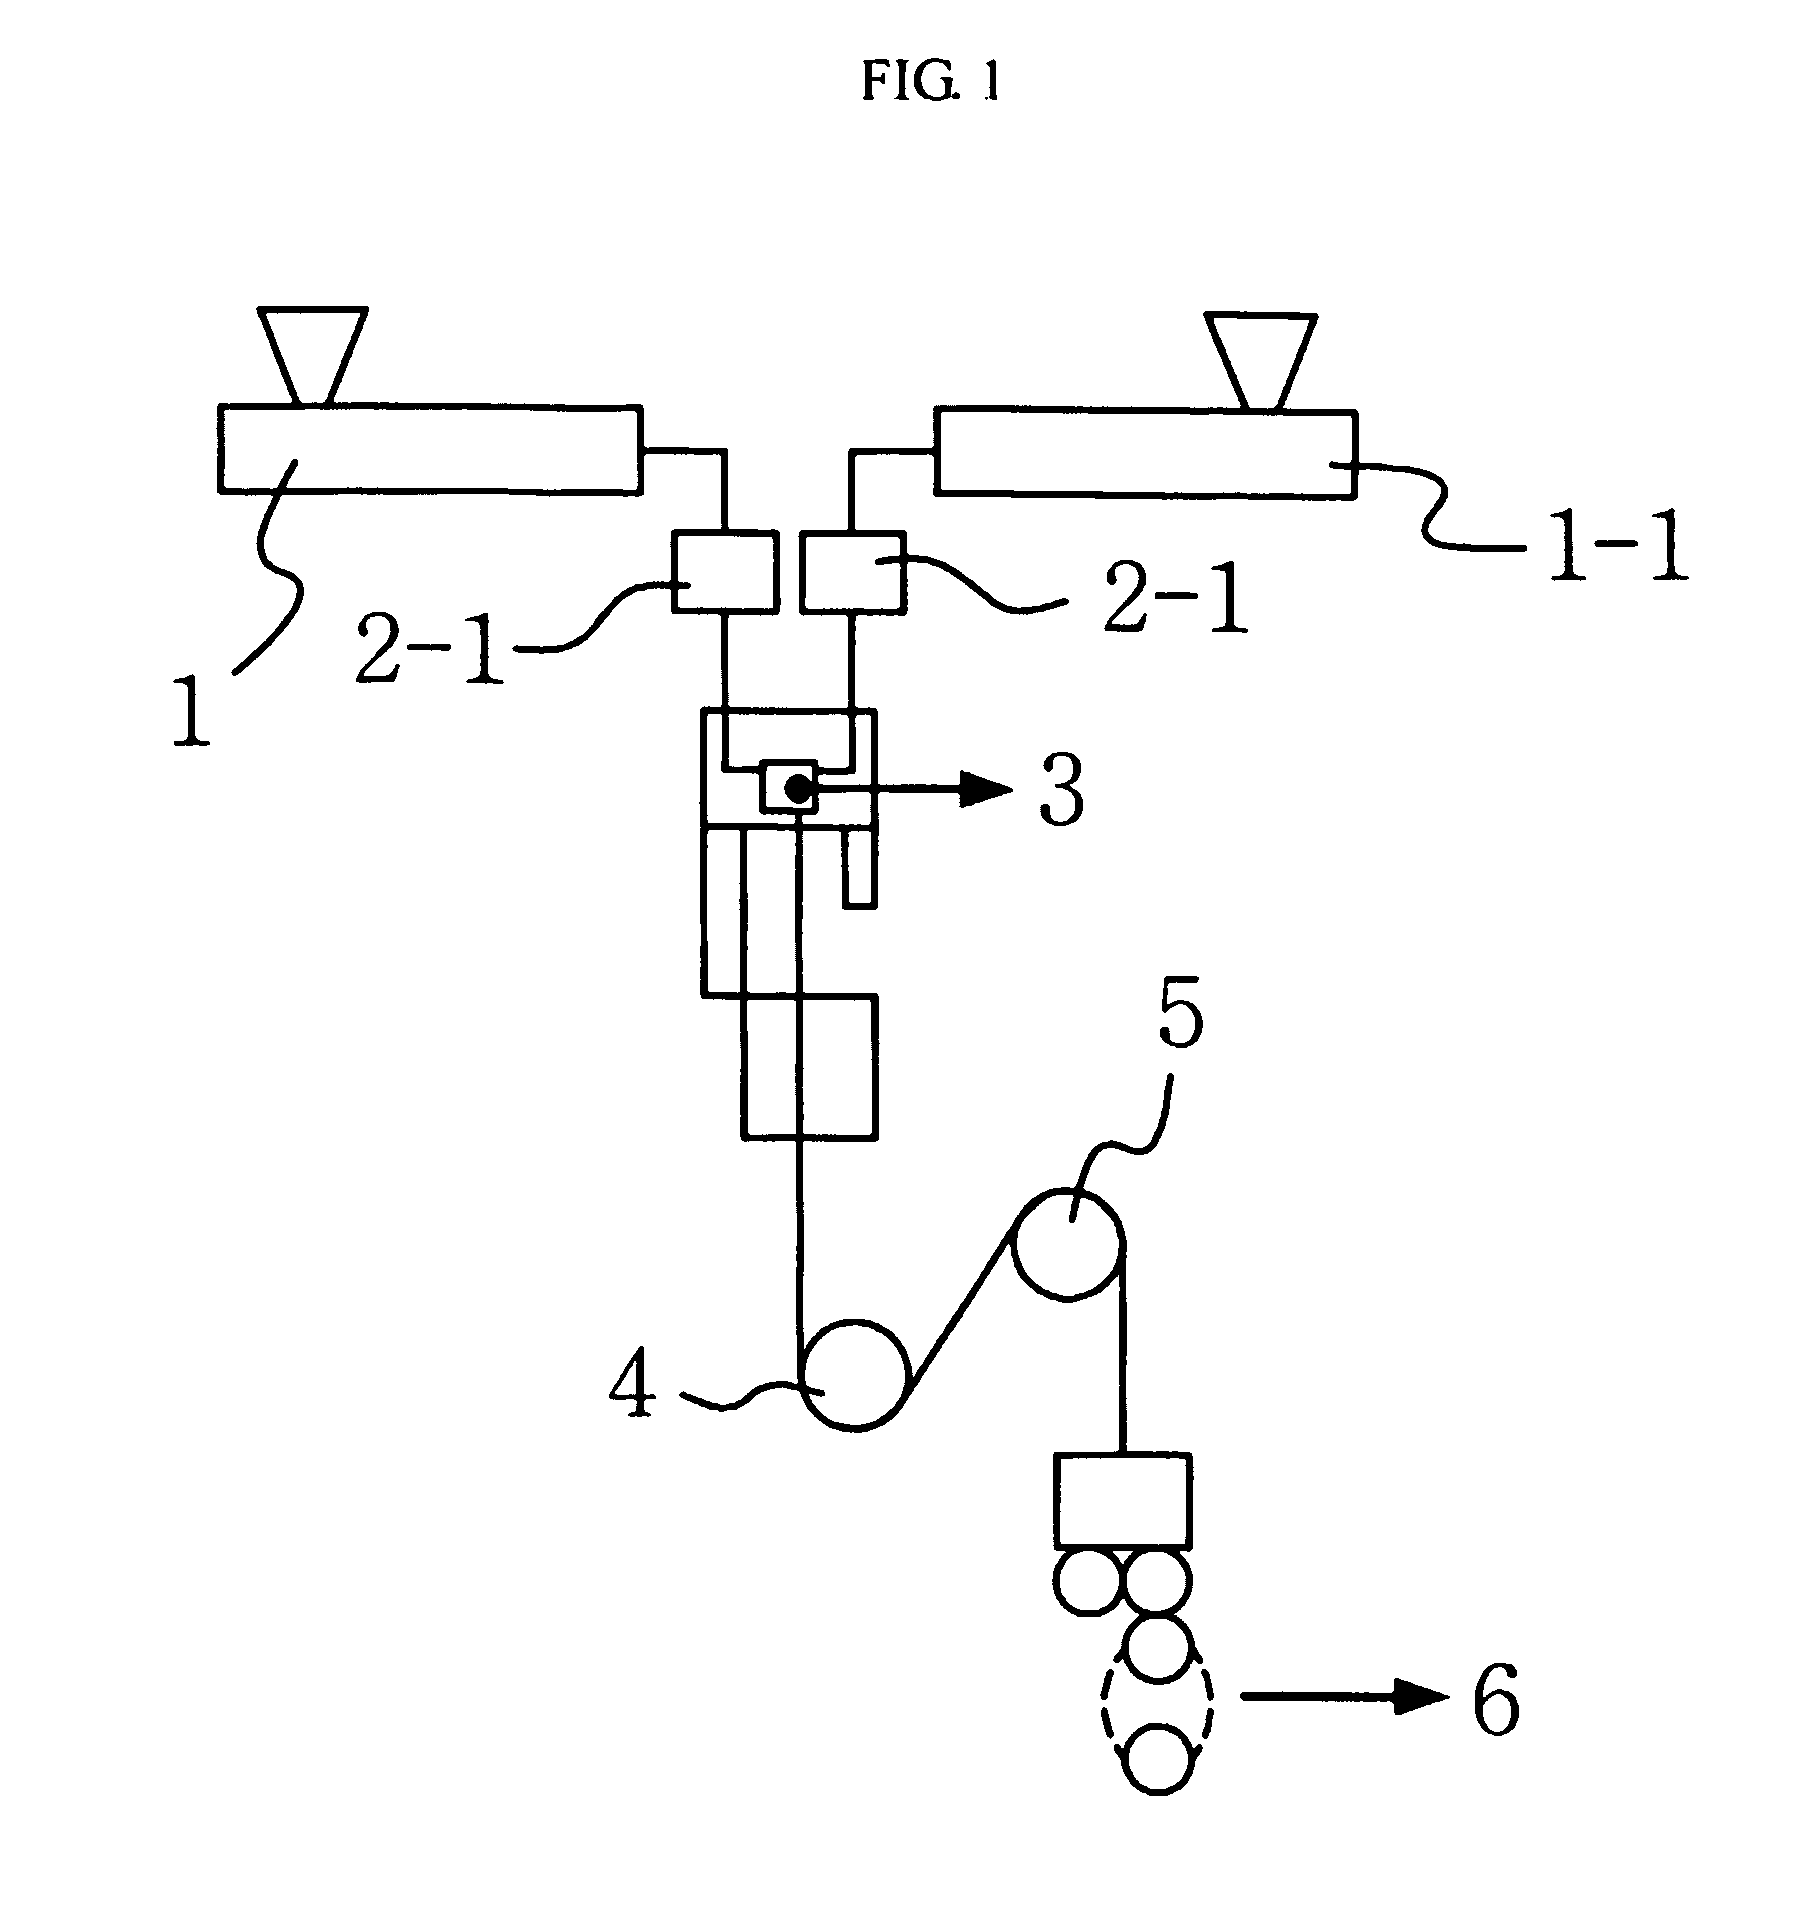 Polyester Conjugated Yarn Having High Self-Crimping Properties and Method of Manufacturing the Same